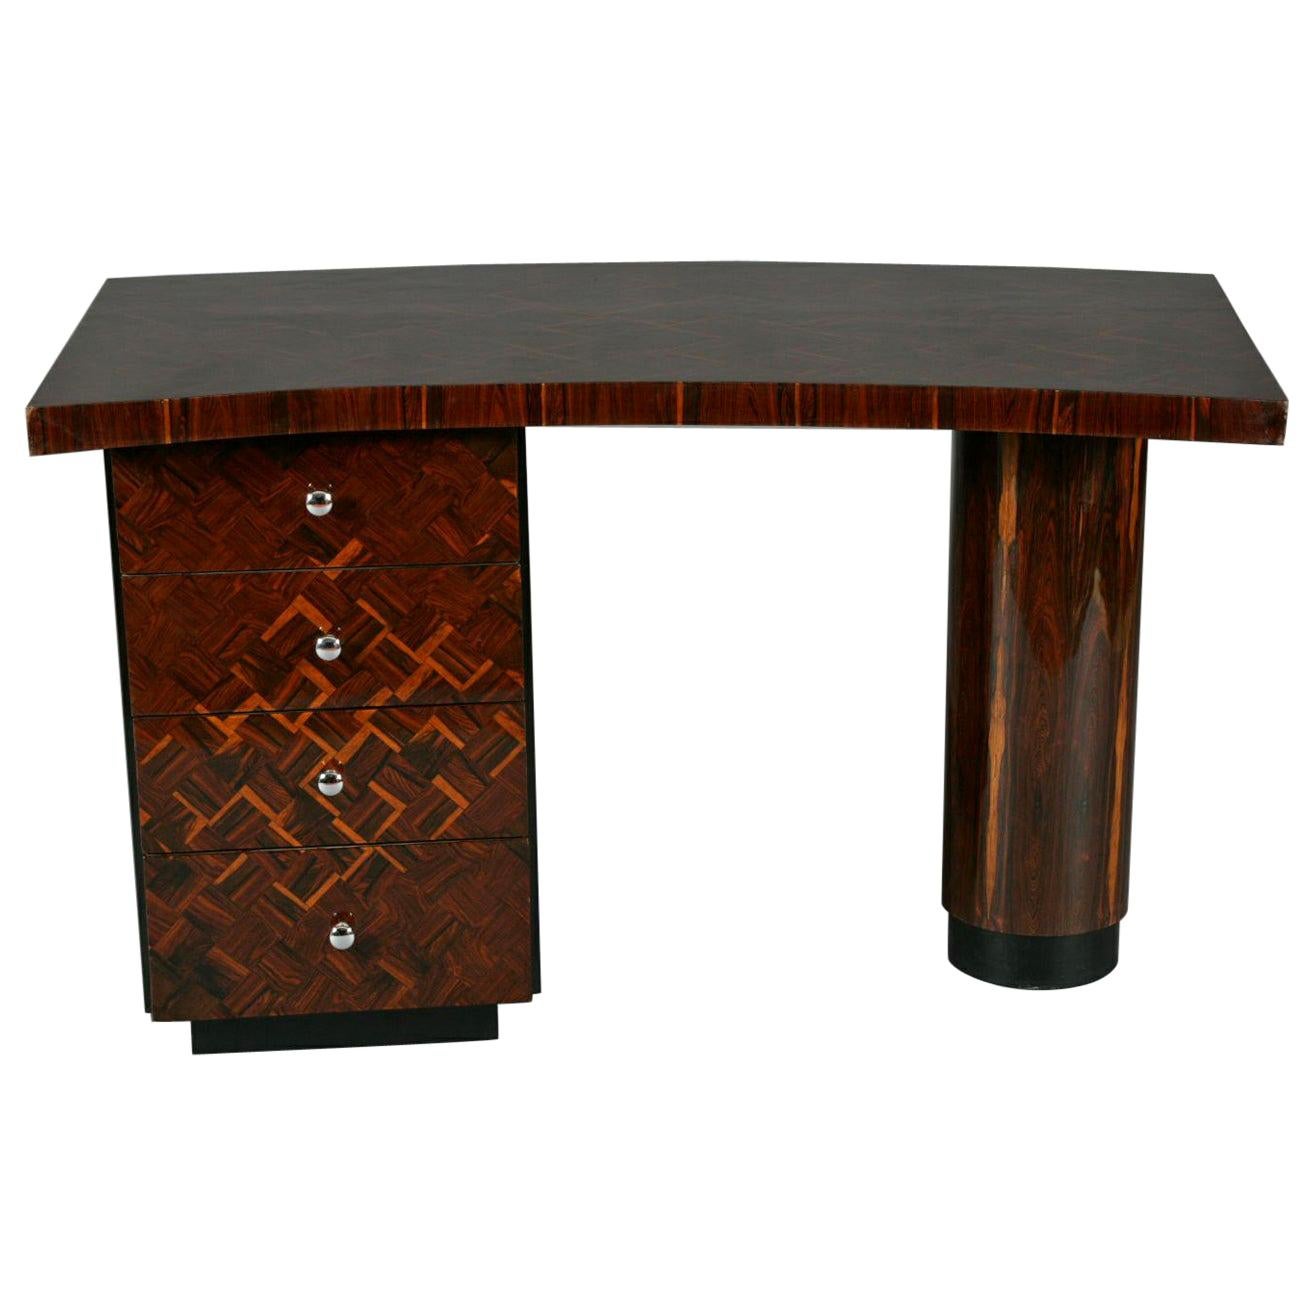 20th Century Art Deco Style French Writing Table